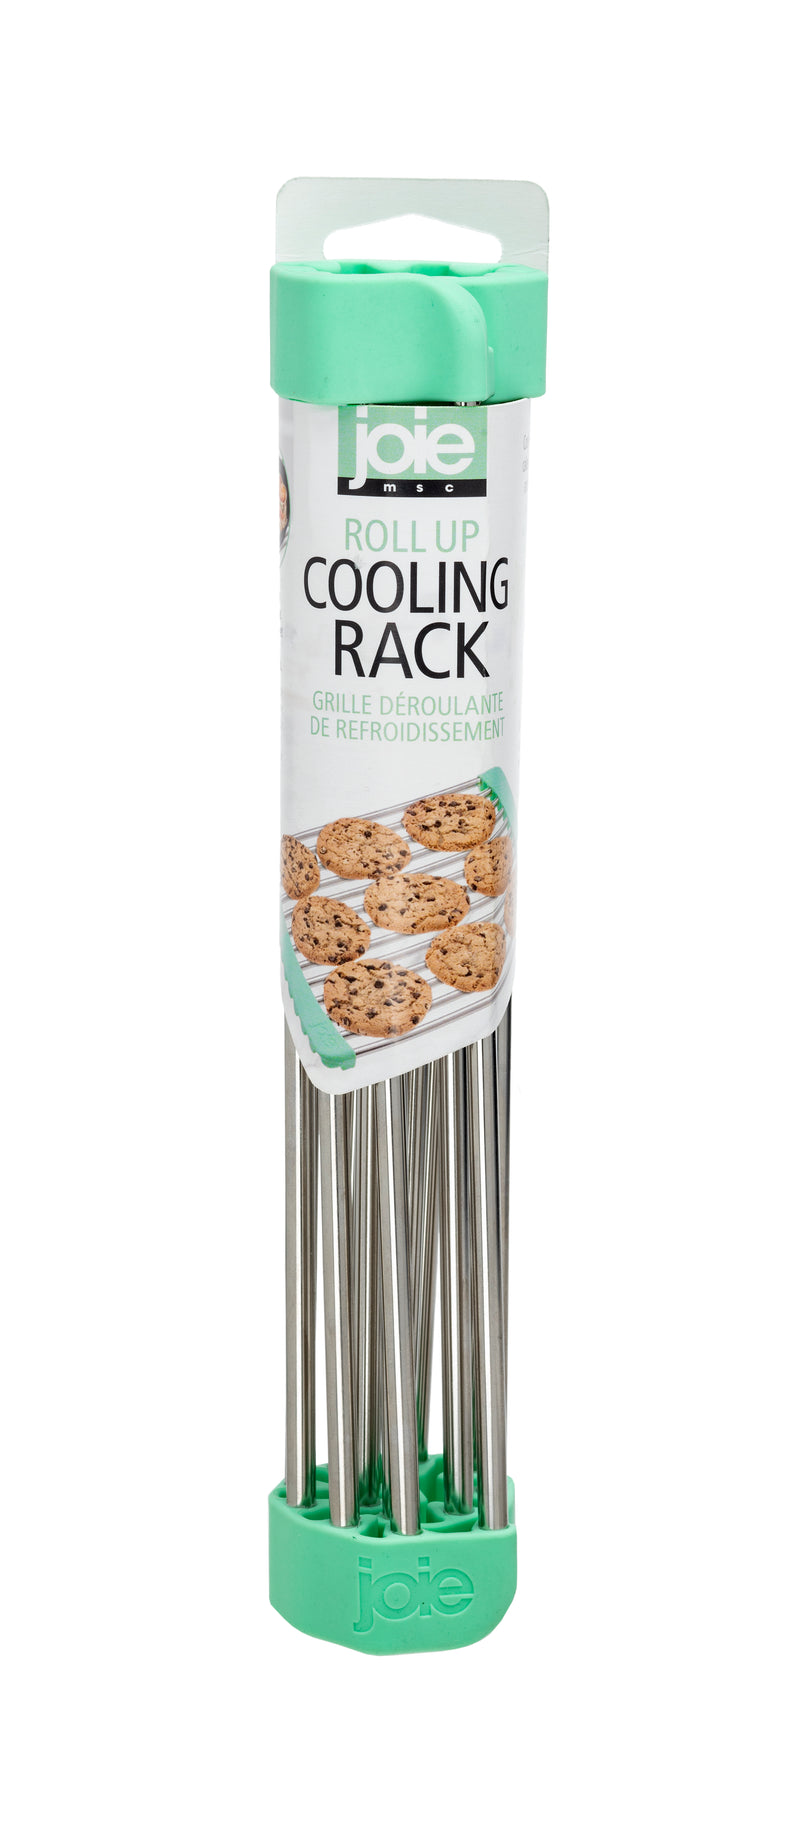 products/28522_RollUpCoolingRack_C.jpg